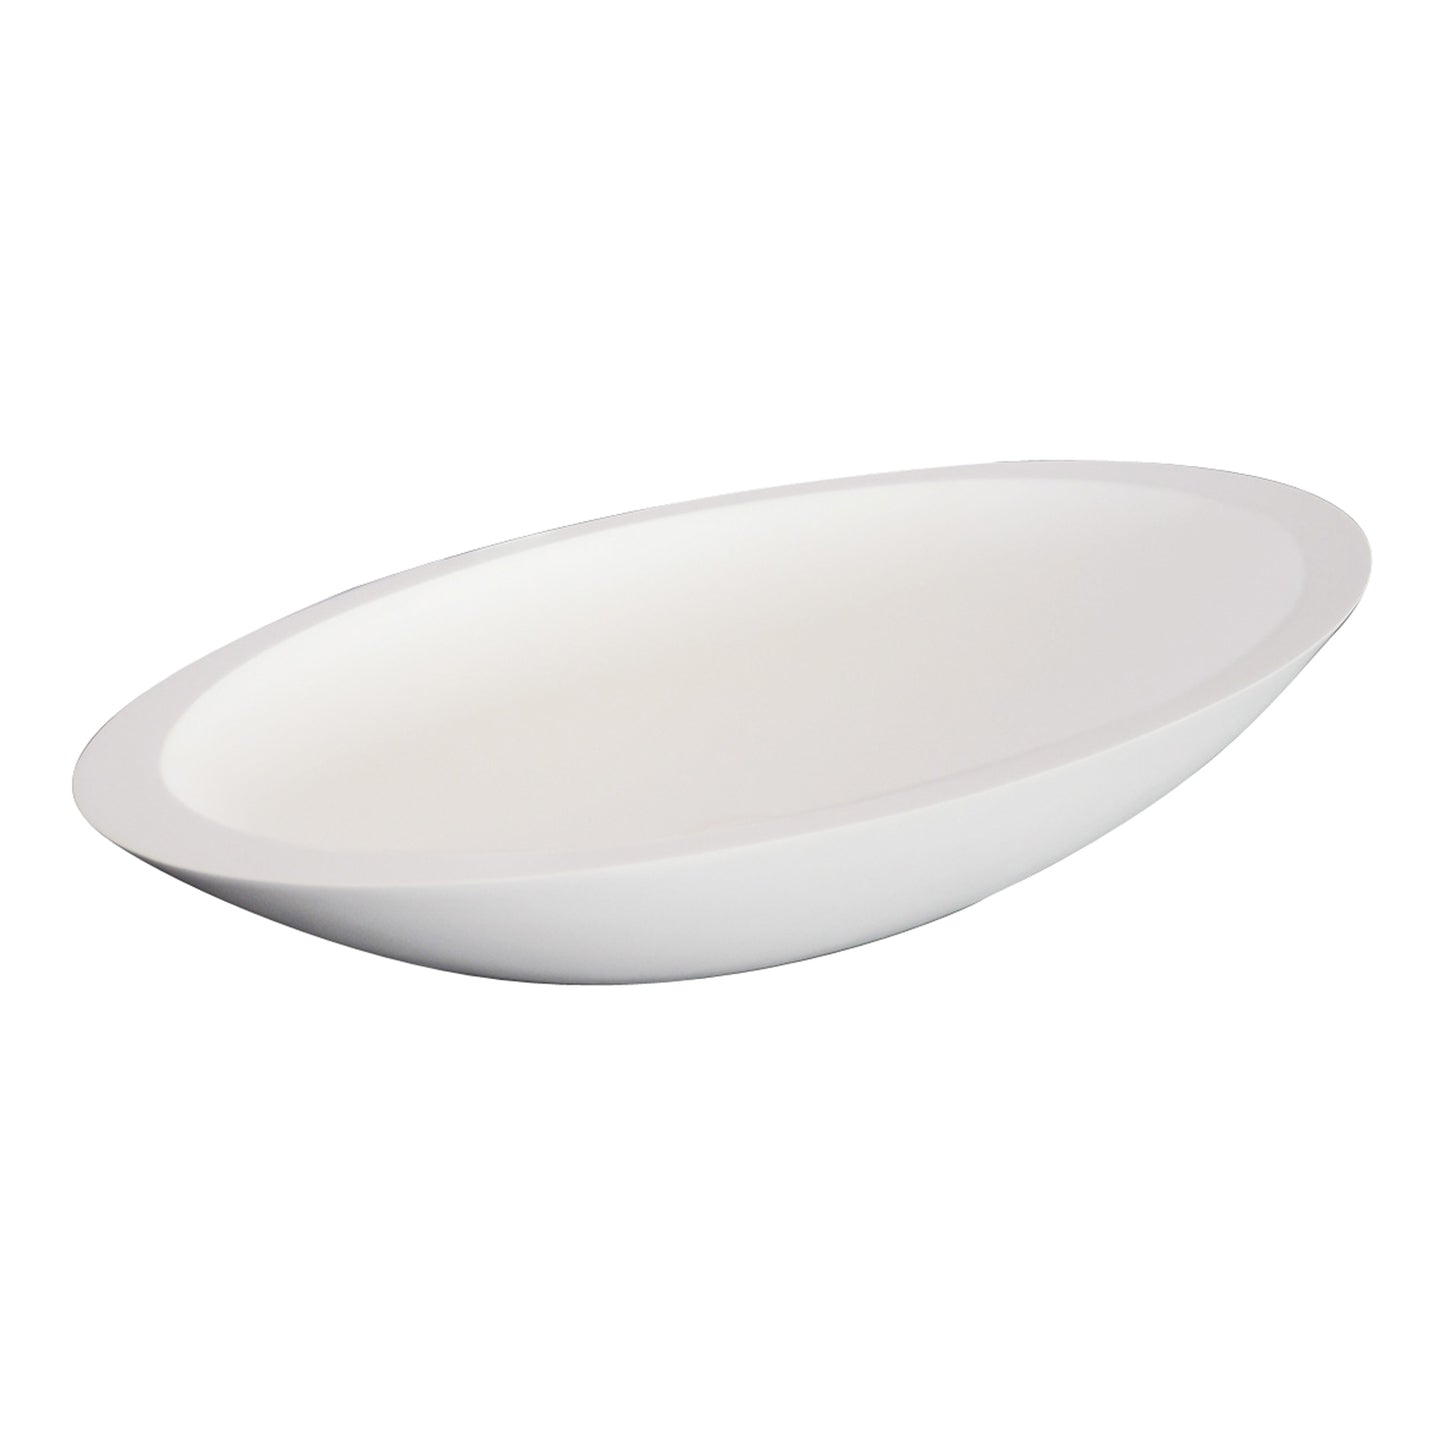 Lila Resin Oval Vessel Sink with Matte White Finish